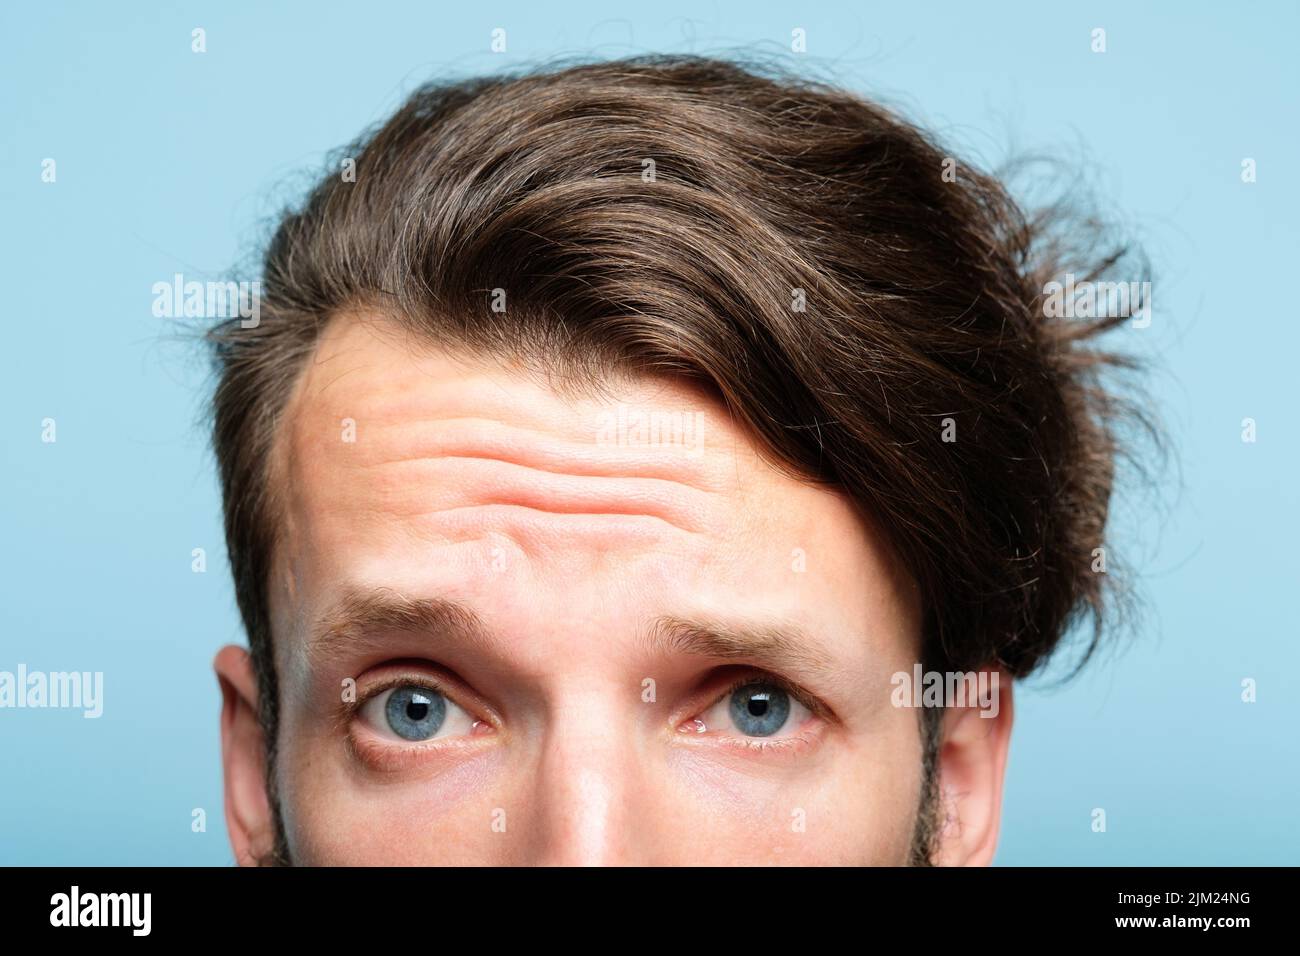 suspicious dubious man skeptic look peep out Stock Photo